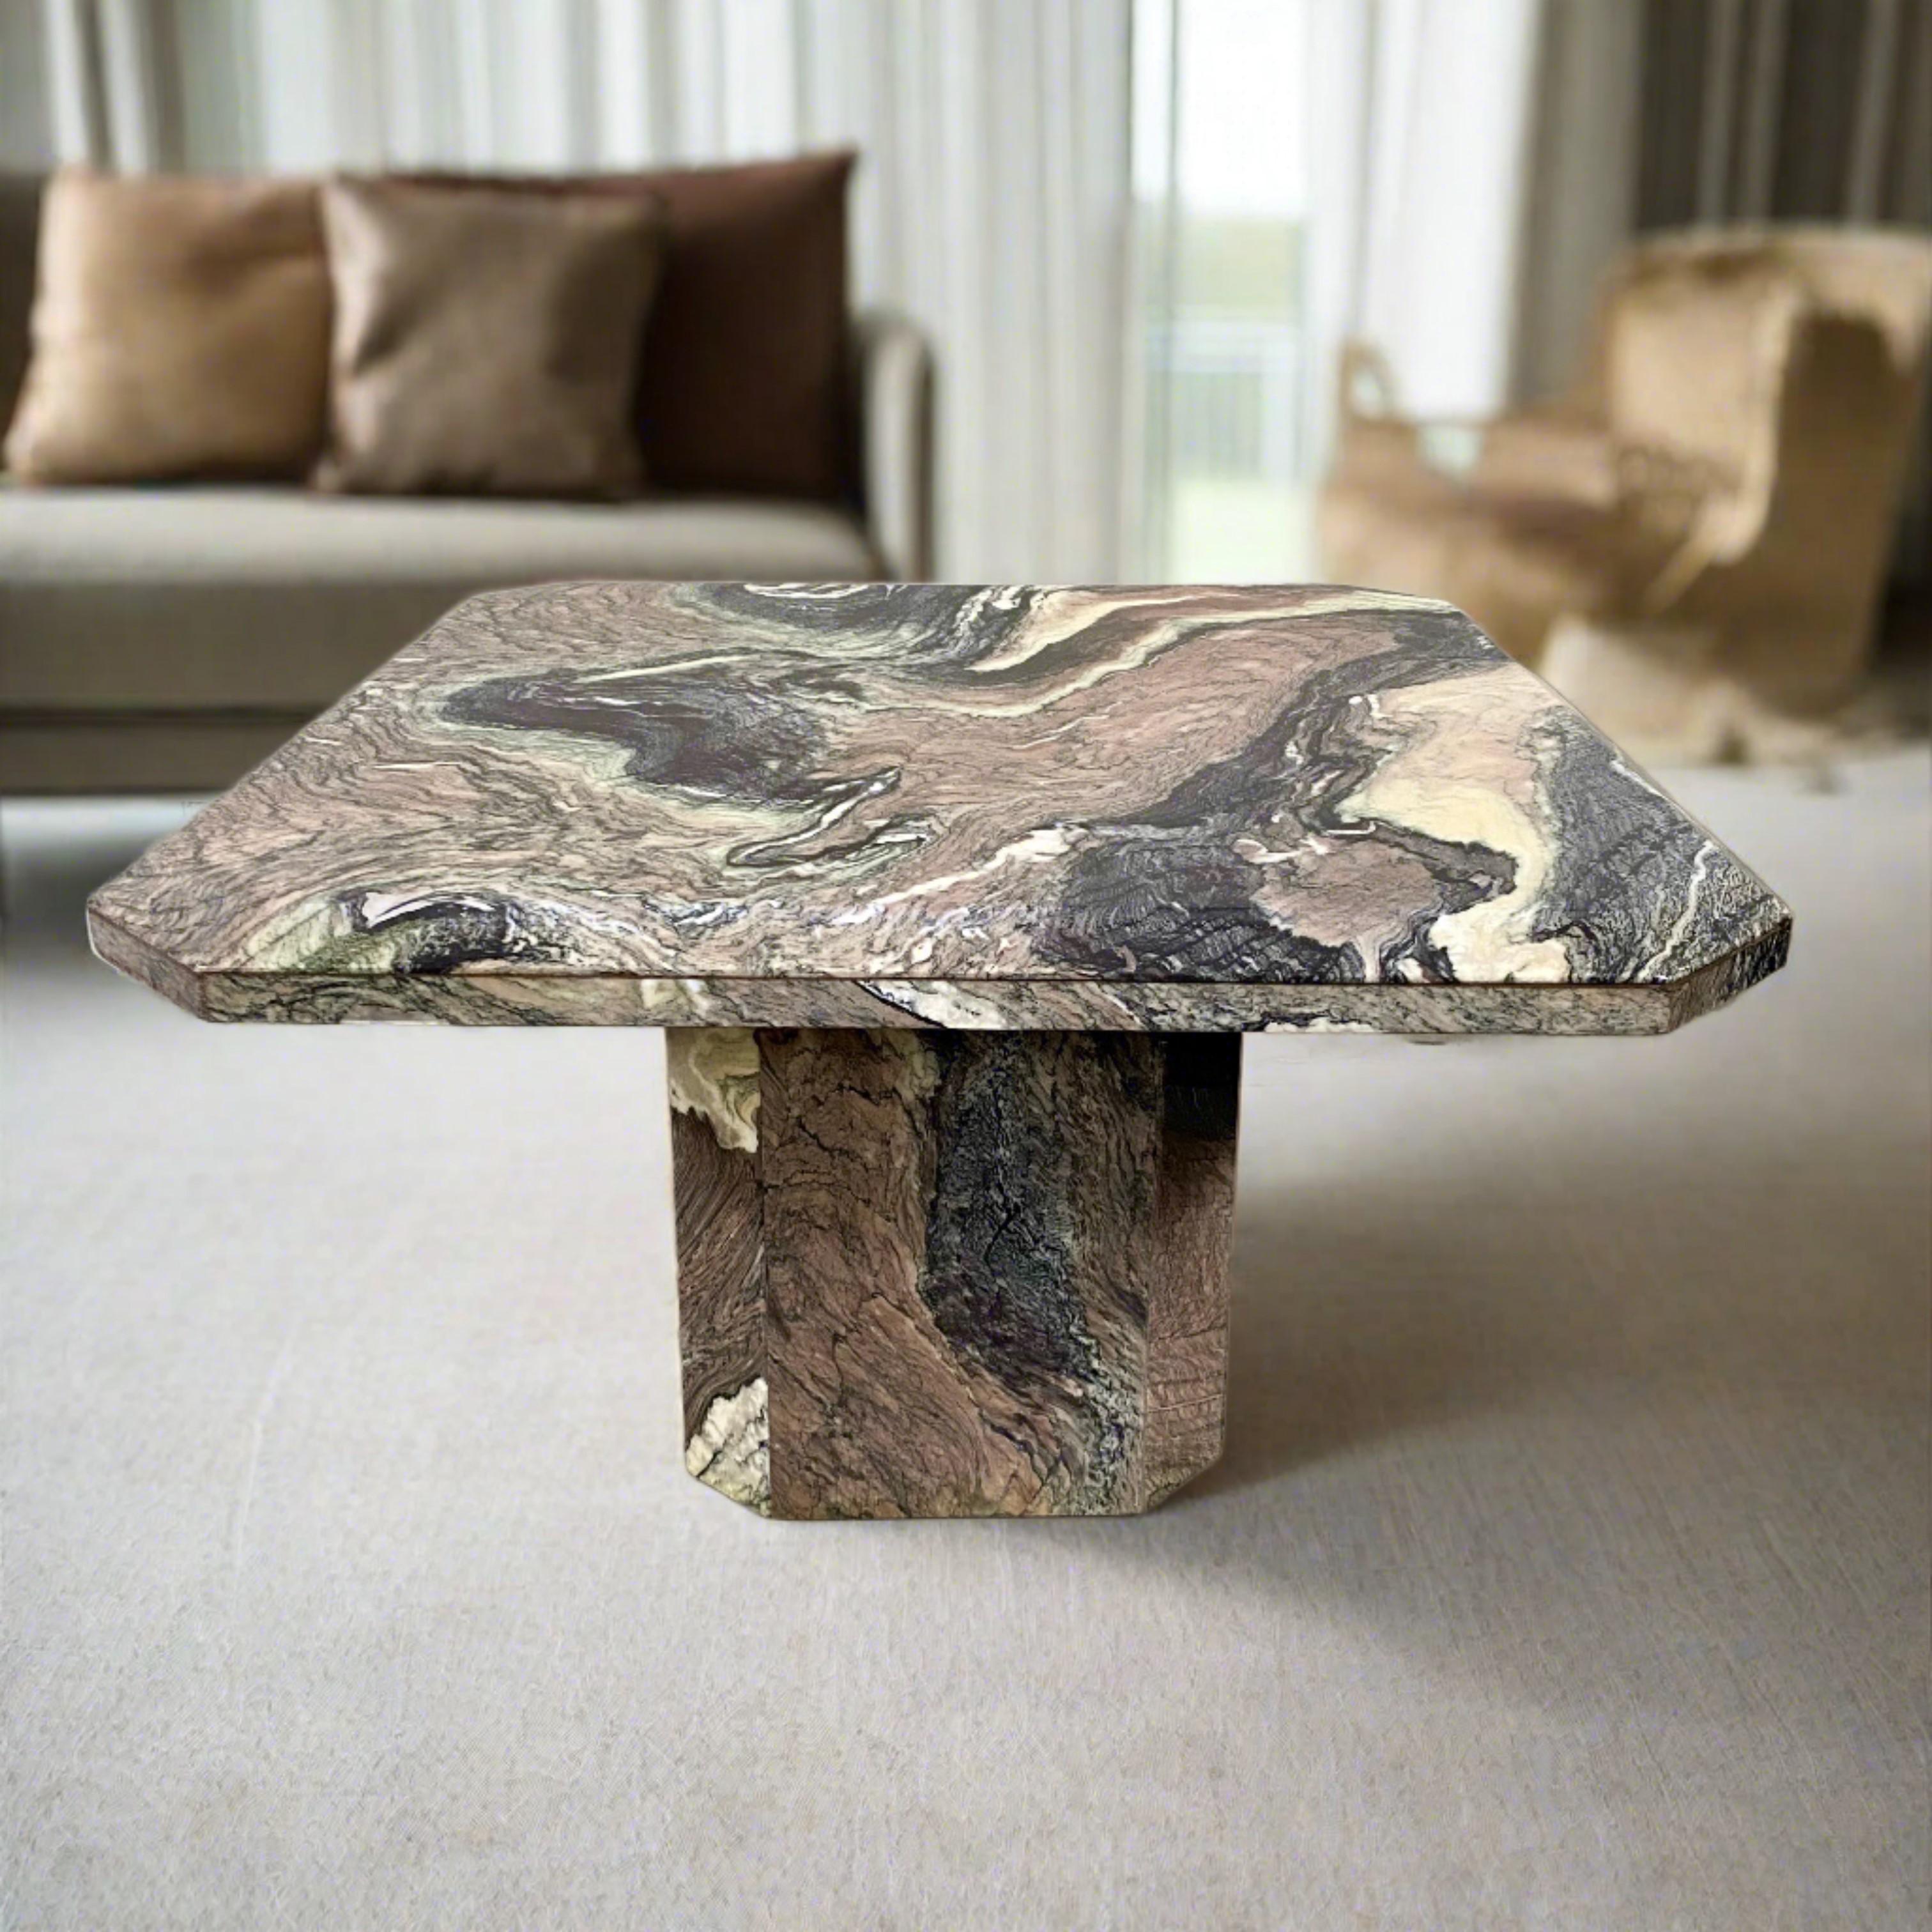 Elevate Your Space with a Mid-Century Octagonal Cipollino Ondulato Marble Coffee Table

Introducing our exquisite Mid-Century Octagonal Cipollino Ondulato Marble Coffee Table, meticulously crafted with Italian design sensibility. This stunning piece